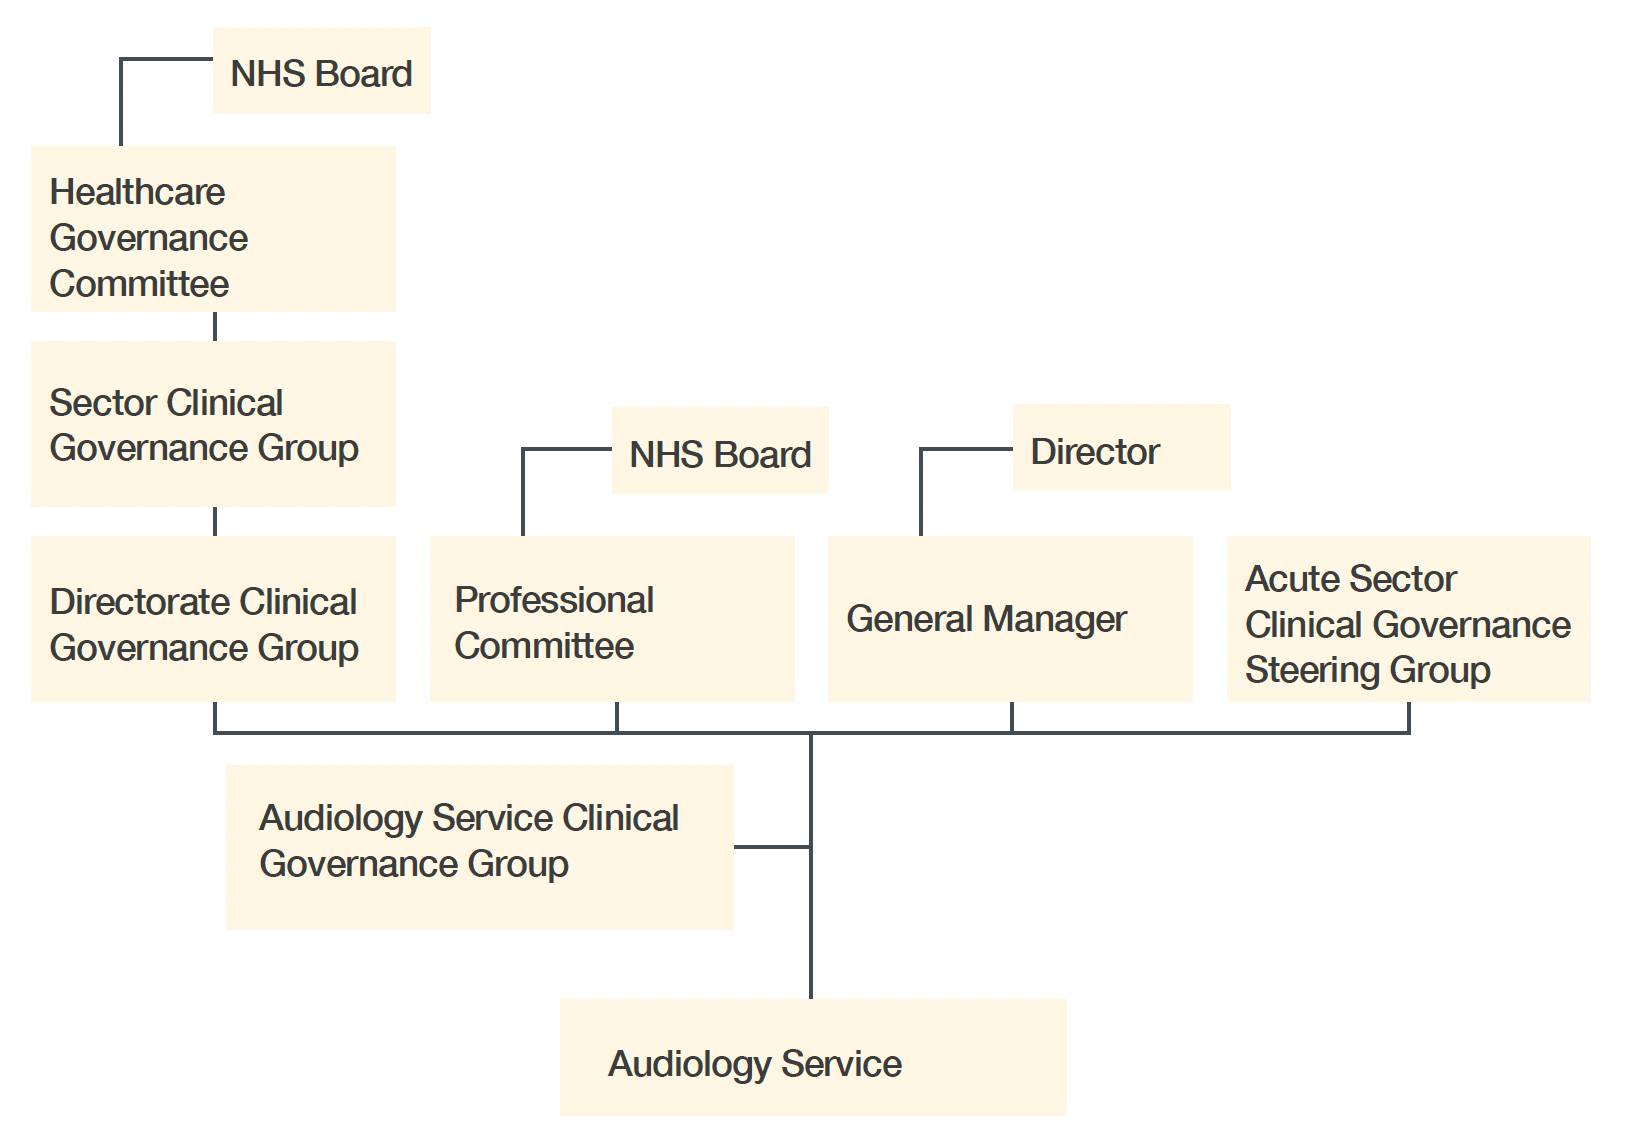 Image shows audiology services reporting structure within Health Boards.